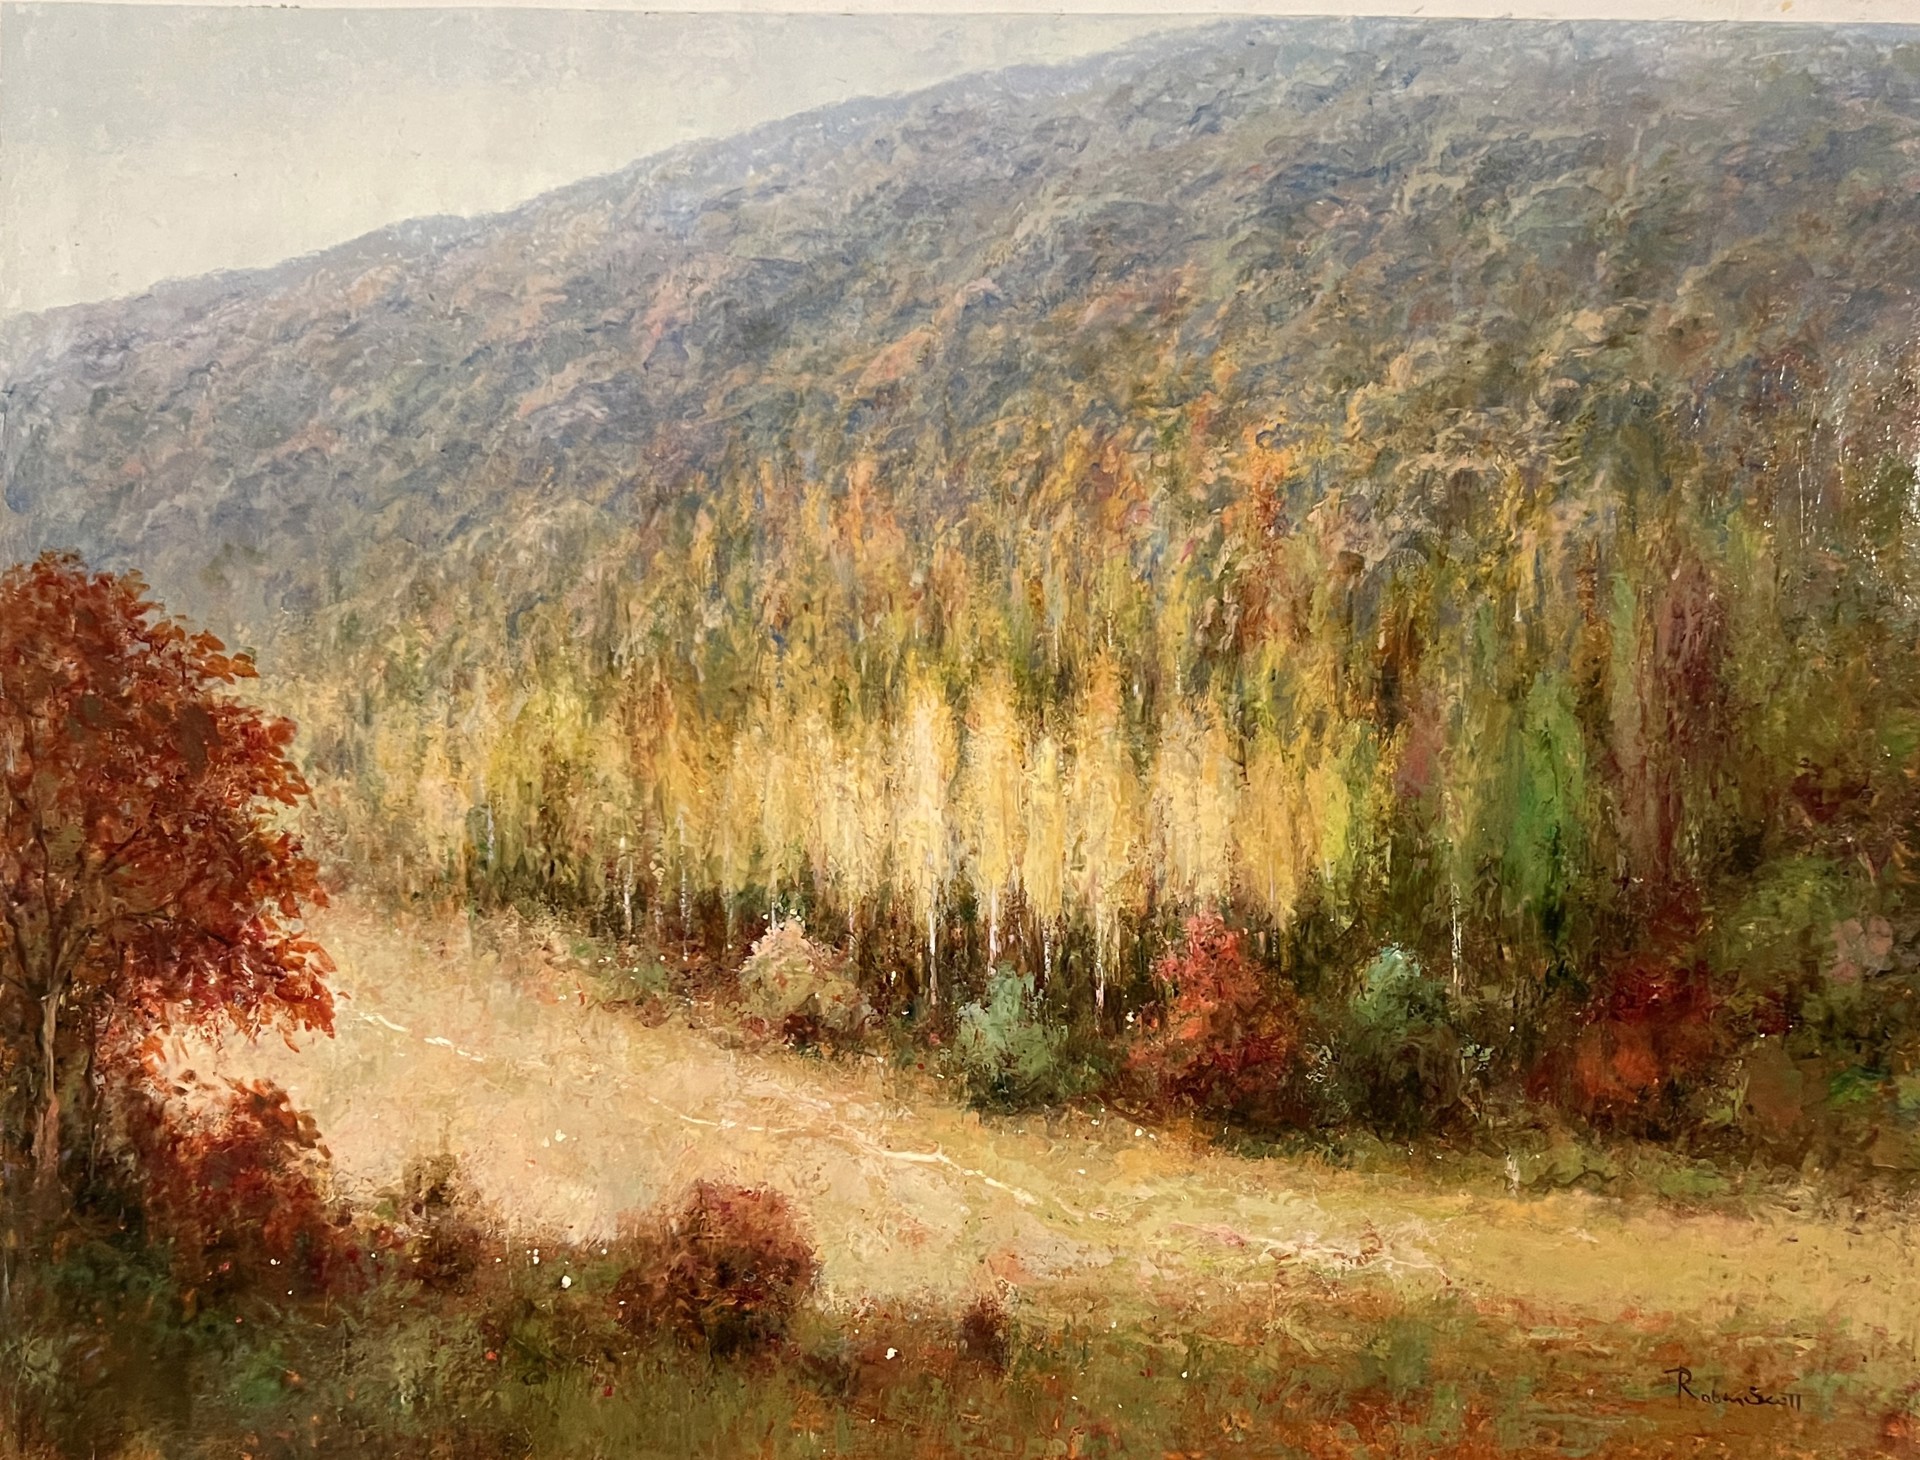 FALL IN THE MOUNTIANS by R SCOTT